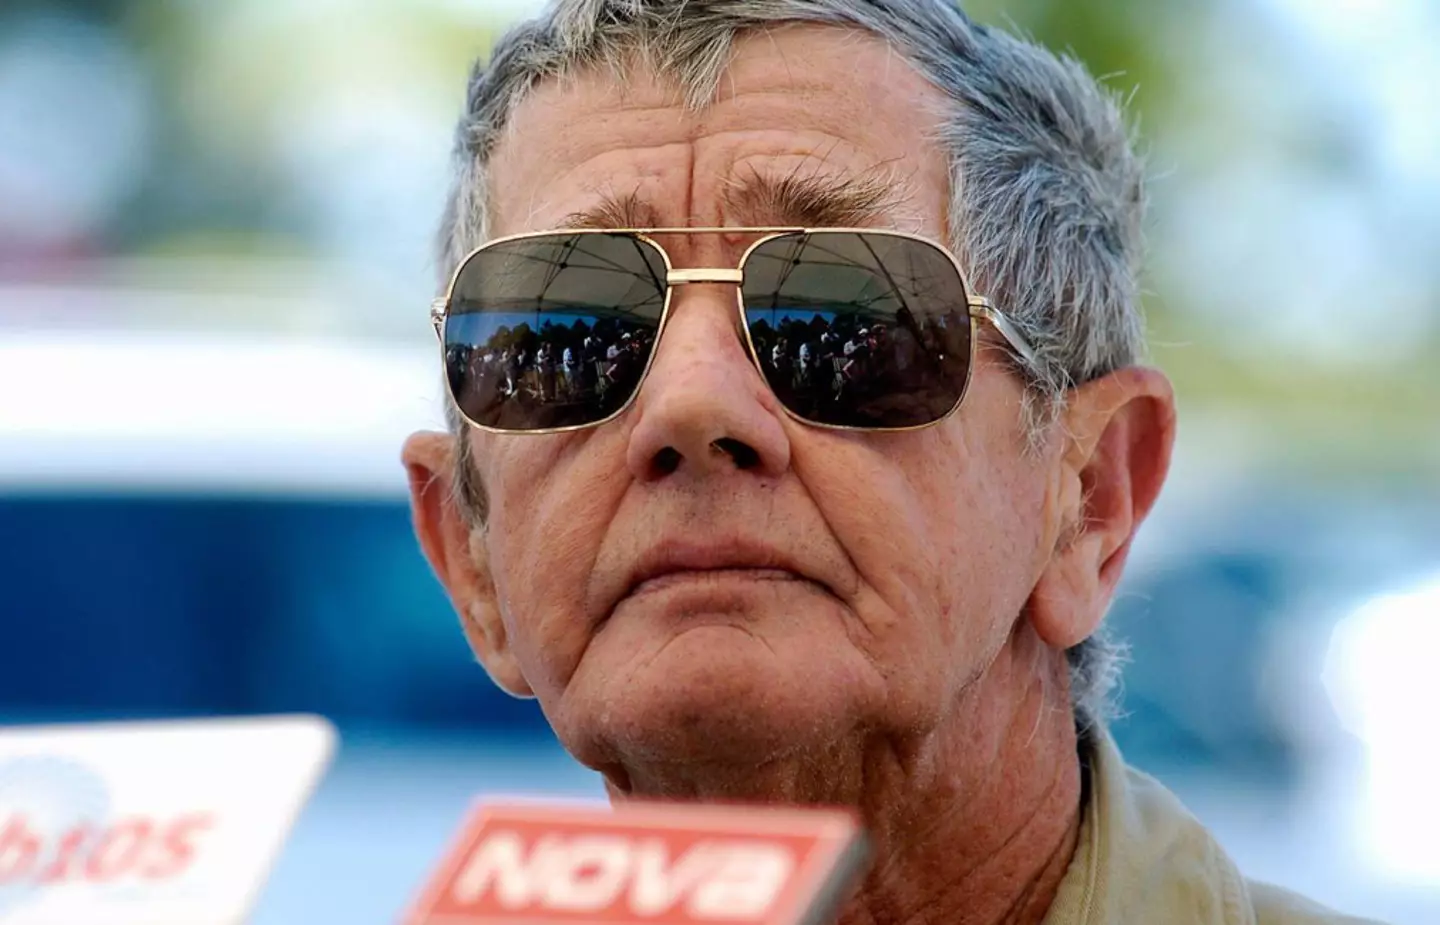 Bob Irwin has released his first public statement in years.